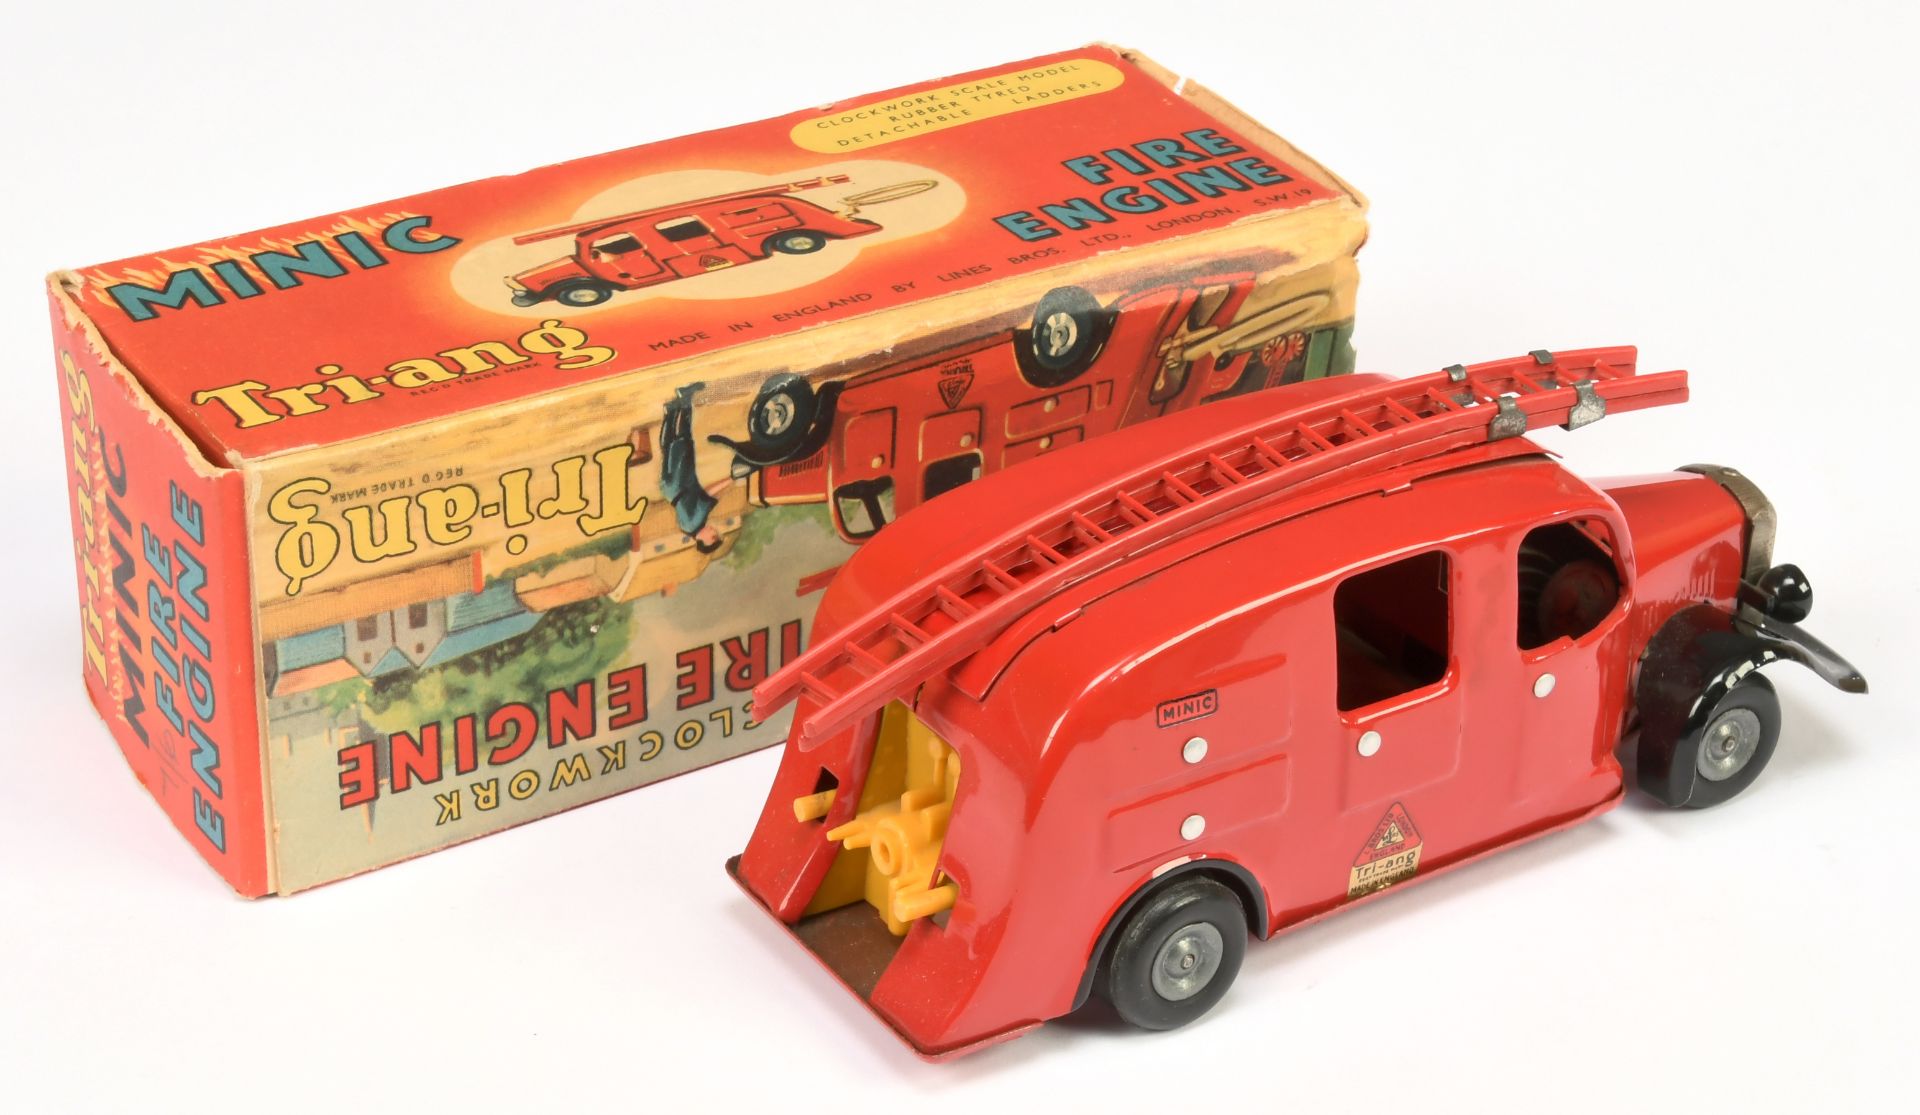 Triang Minic Clockwork 62M Fire Engine - Red including plastic ladders, black, complete with bell - Image 2 of 2